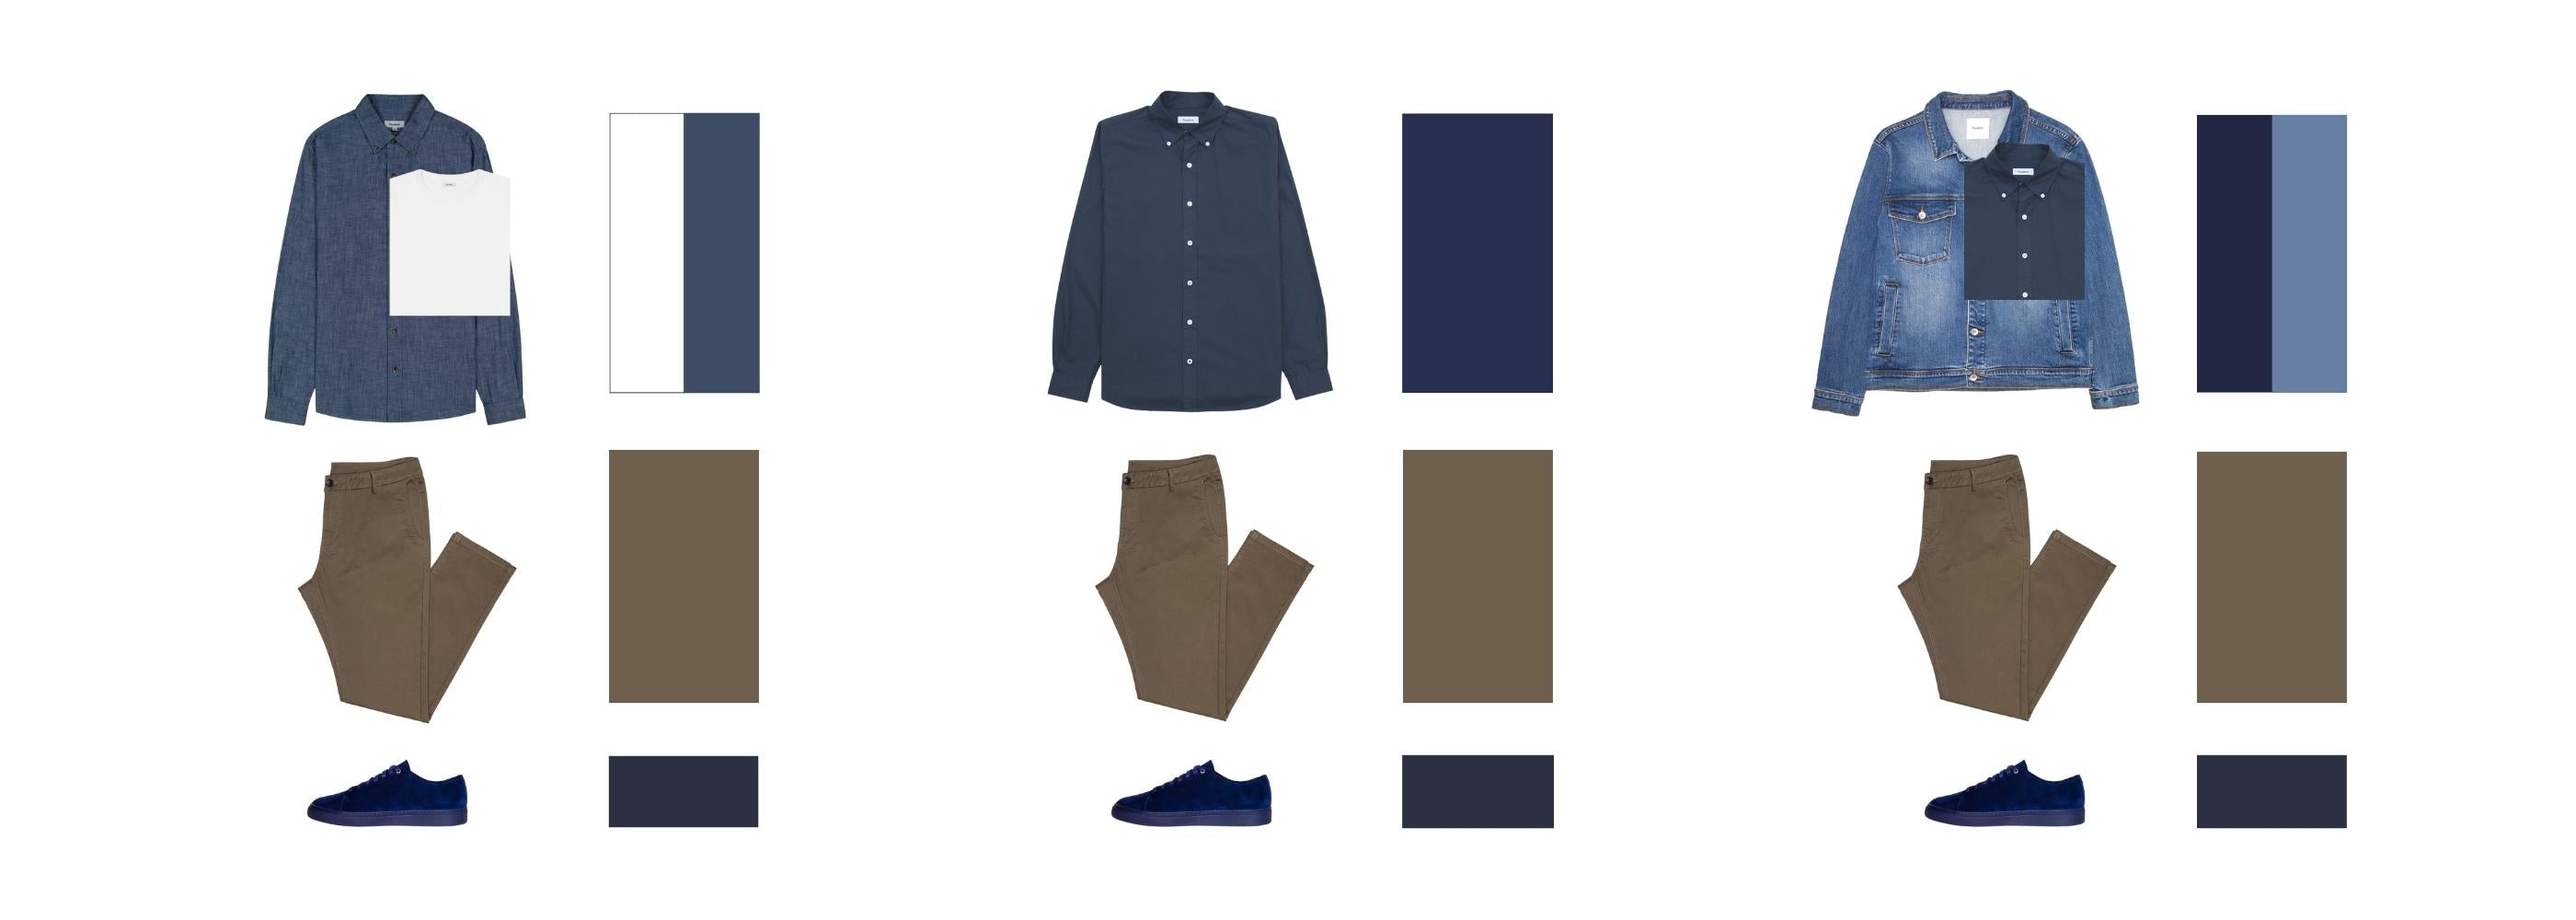 Foolproof Colour Combinations for Army Chinos with White/Navy Sneakers